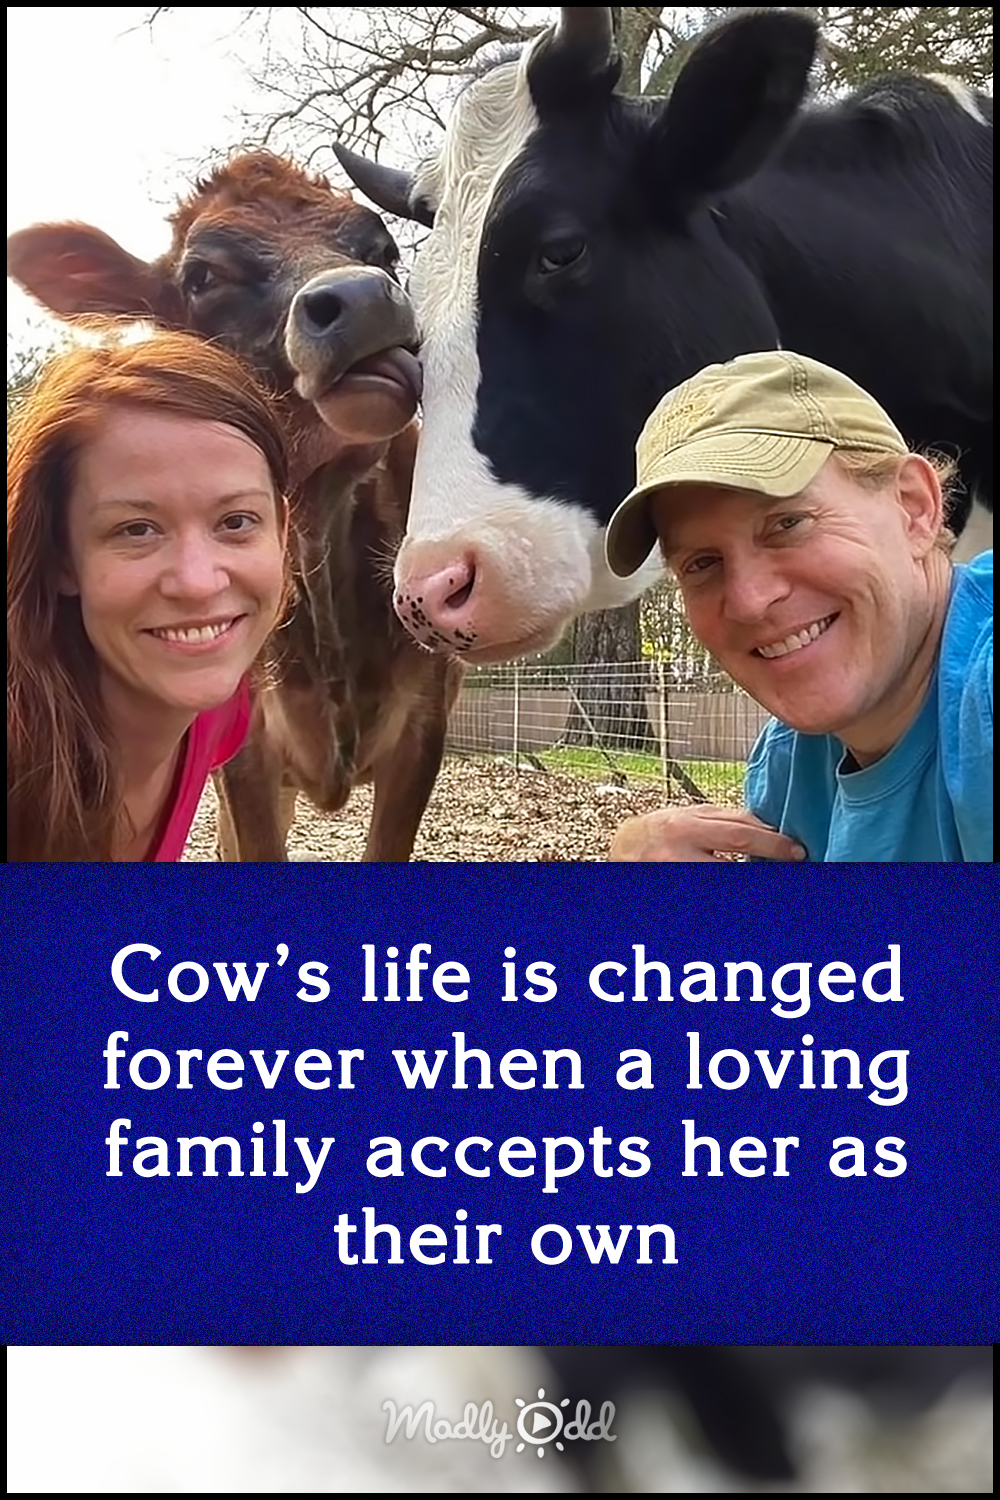 Cow’s life is changed forever when a loving family accepts her as their own